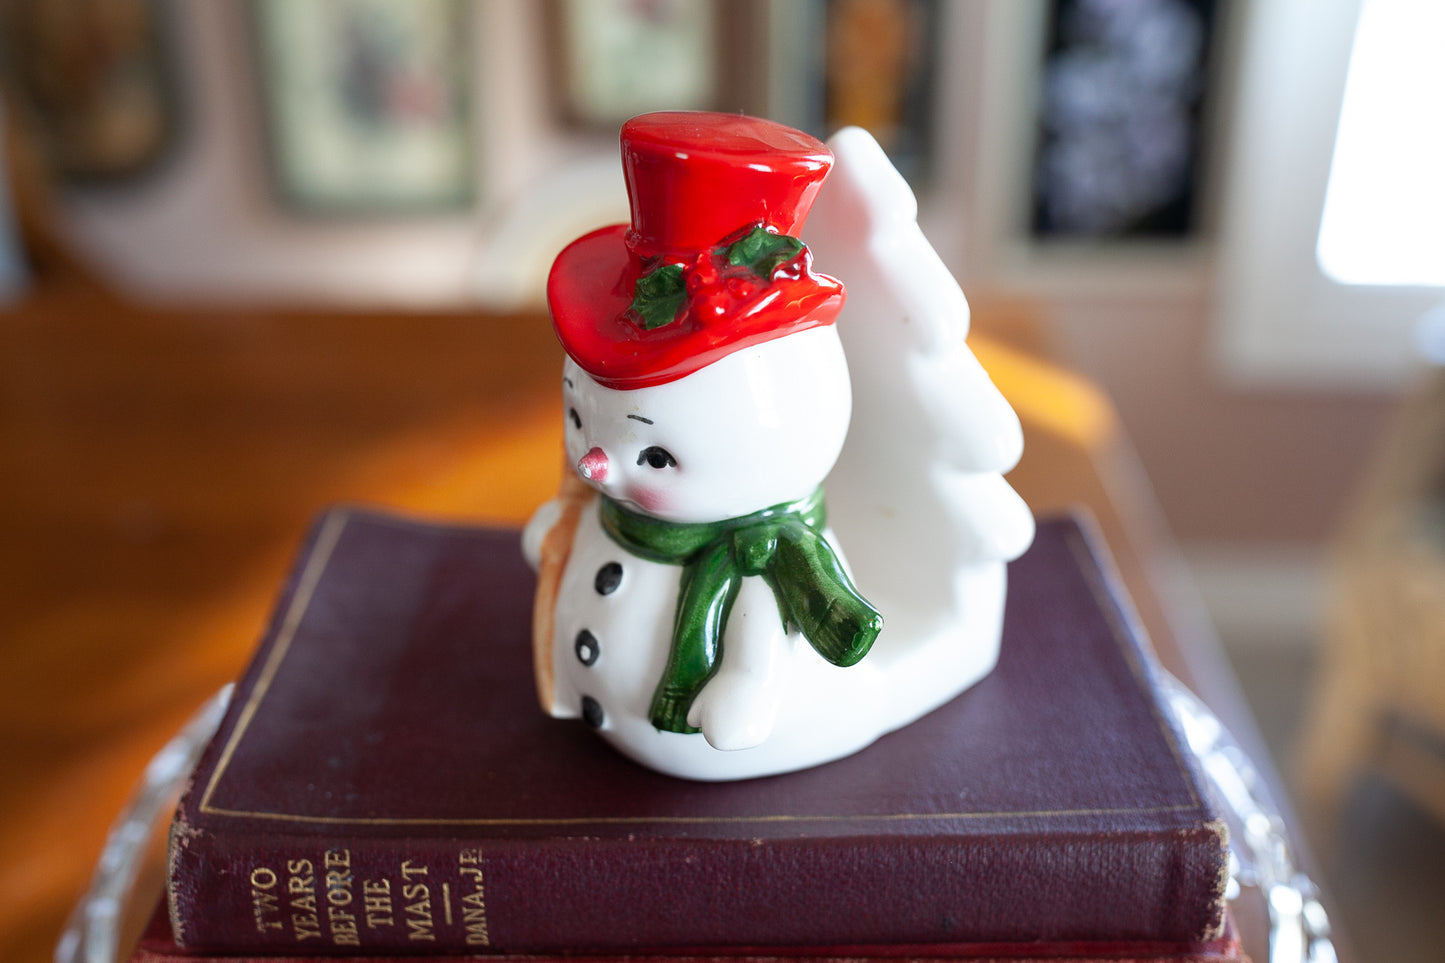 Vintage Ceramic Napkin Holder of Snowman Wearing a Top Hat with Broom and Scarf by Lefton Japan